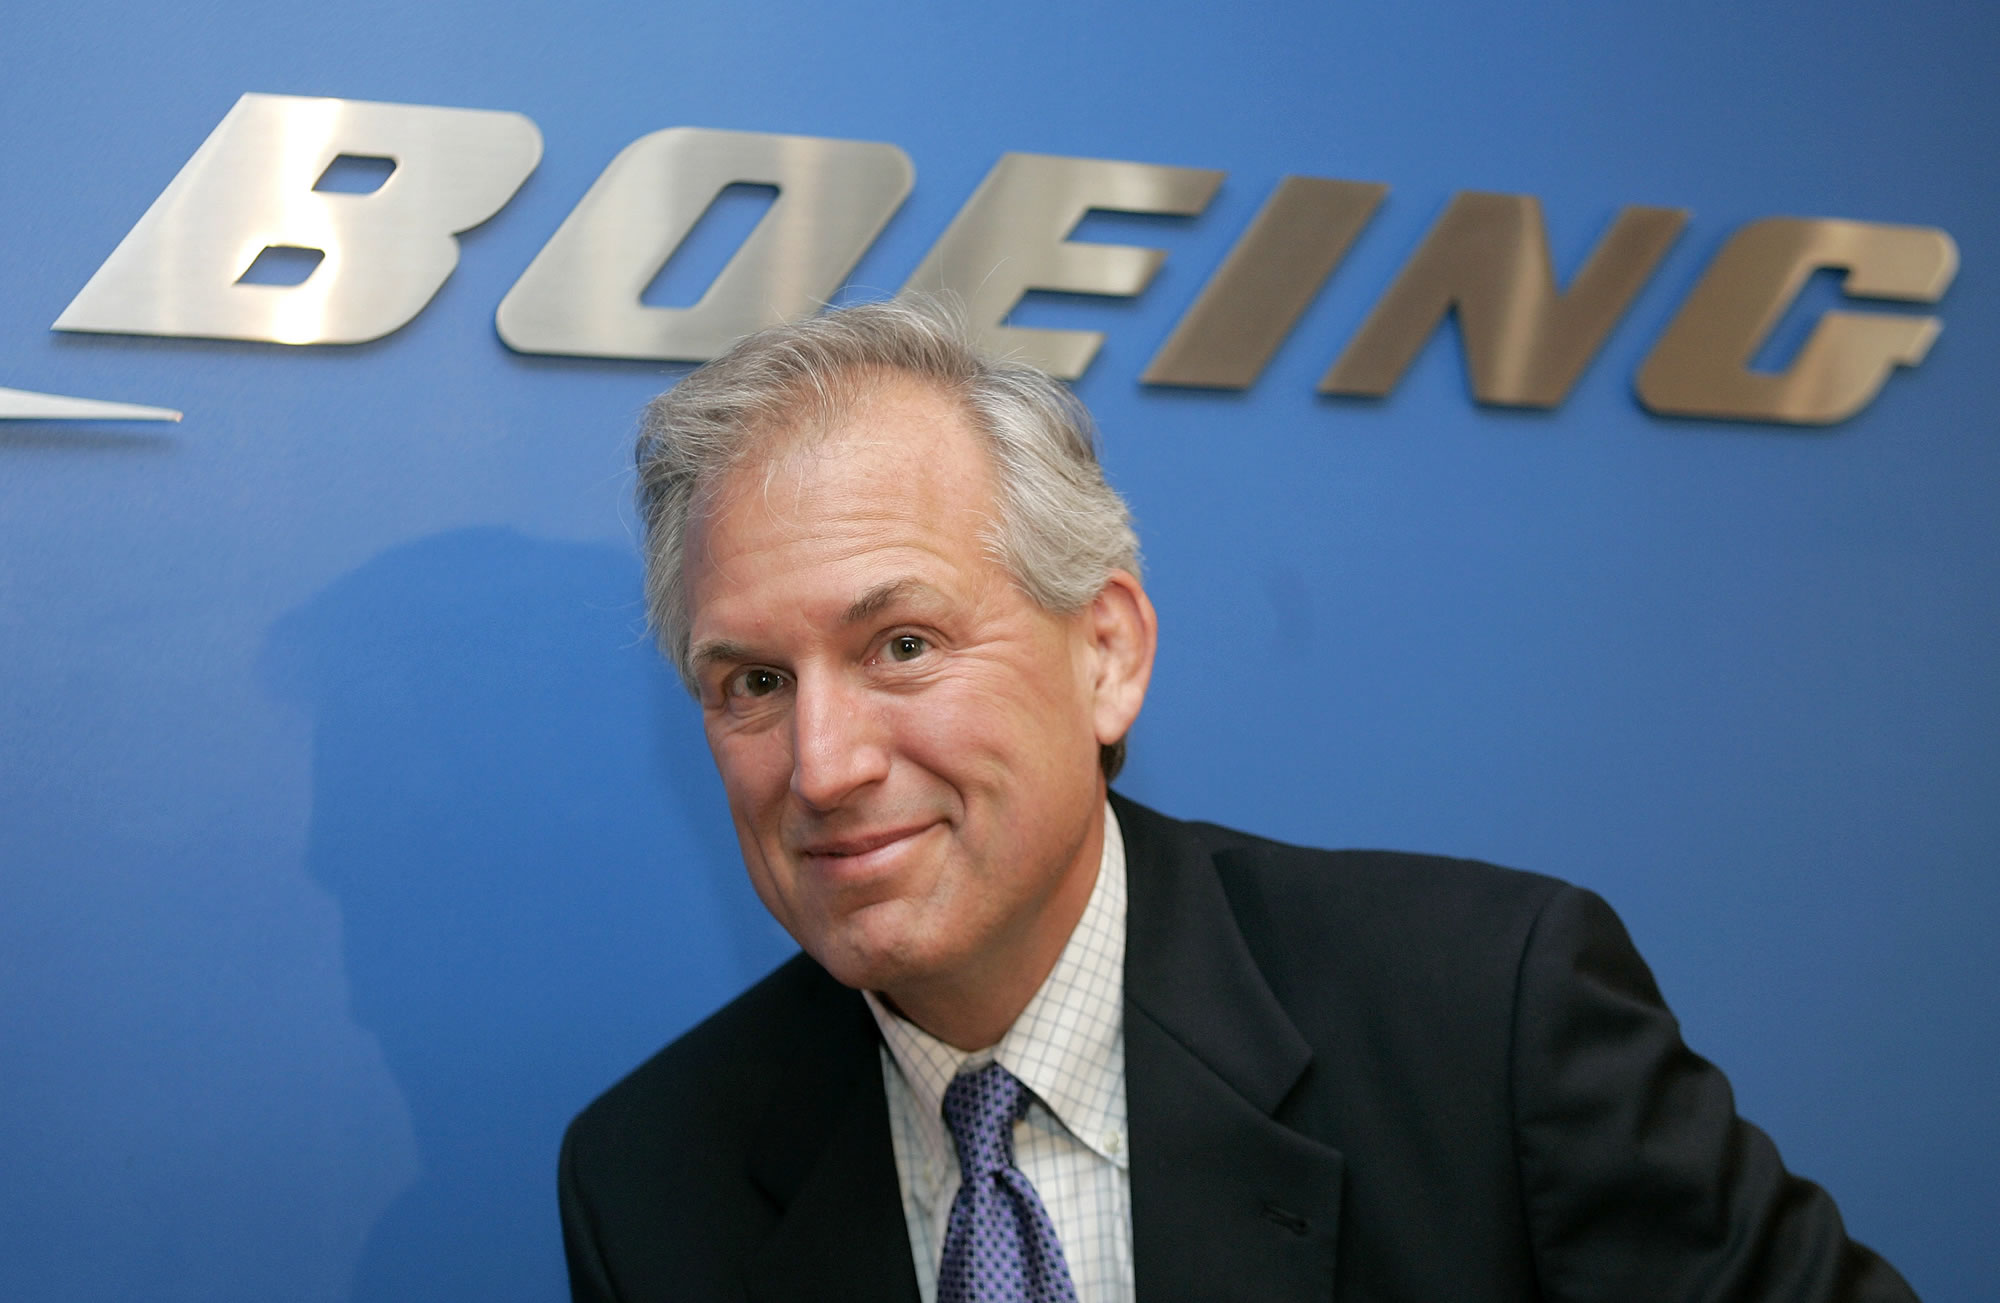 Boeing CEO Jim McNerney expects the grounded 787 Dreamliner to take to the skies again soon.